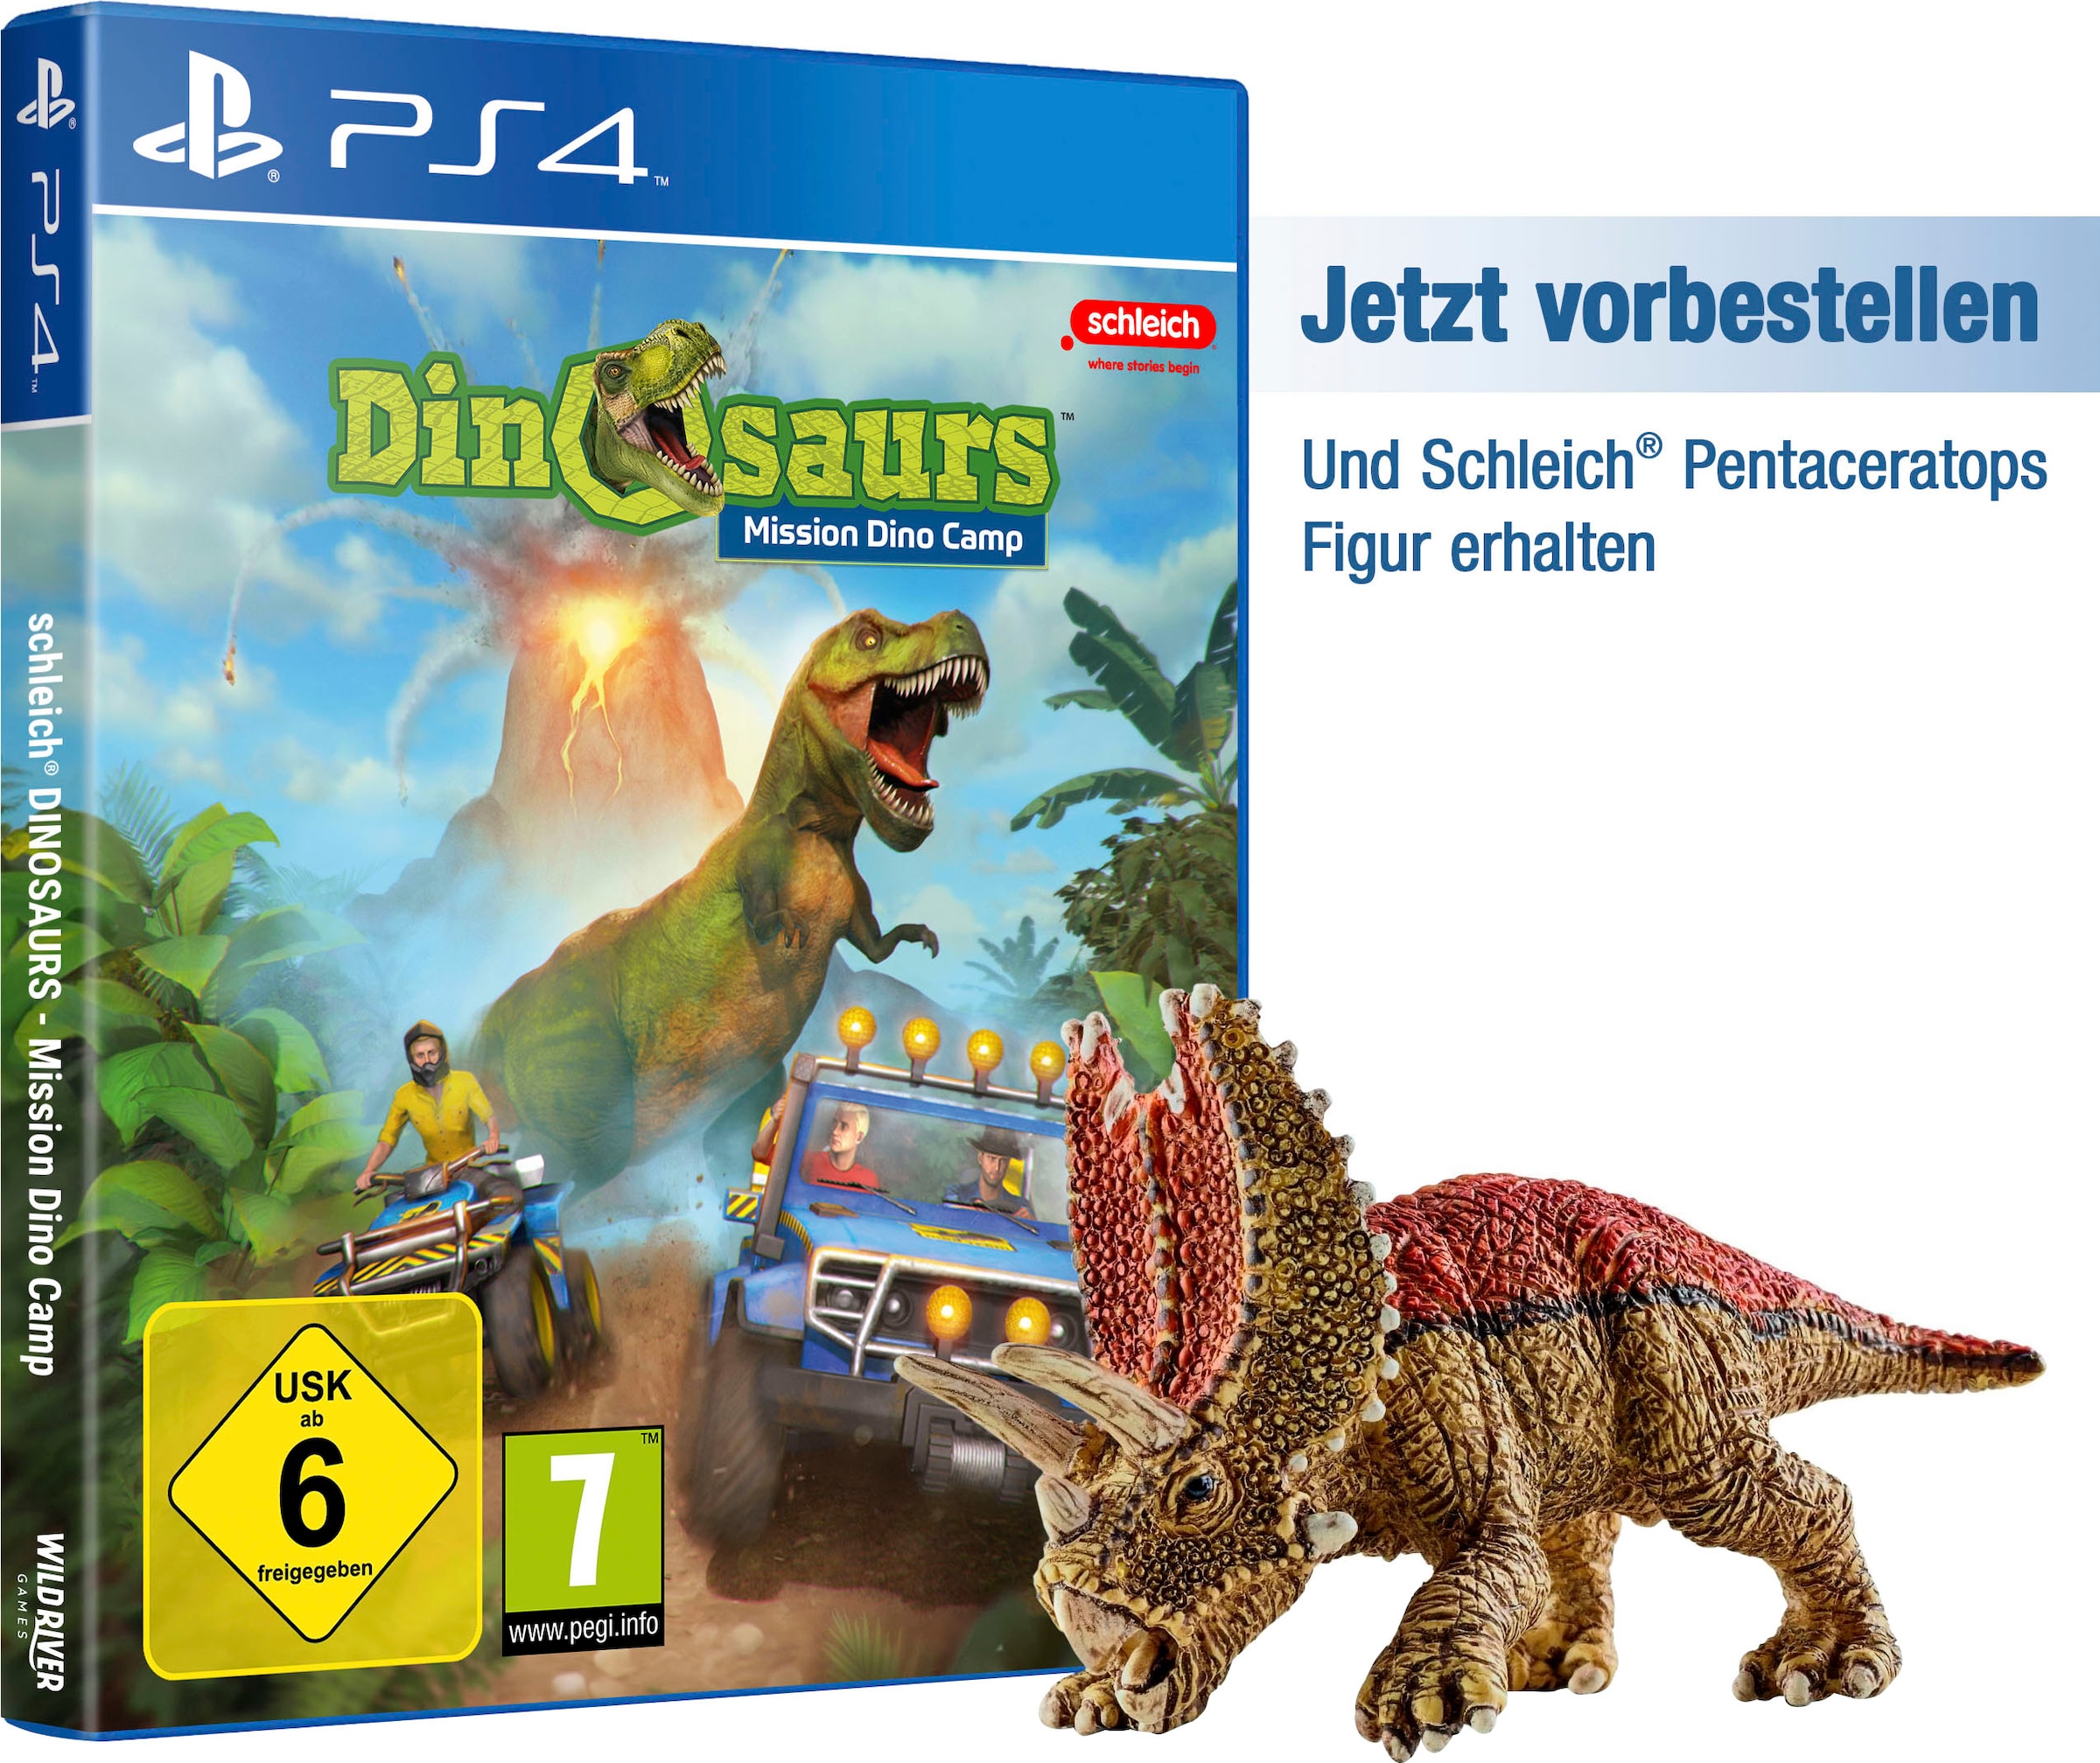 Mission Software »Dinosaurs: Spielesoftware Pyramide bei 4 Dino PlayStation Camp«,